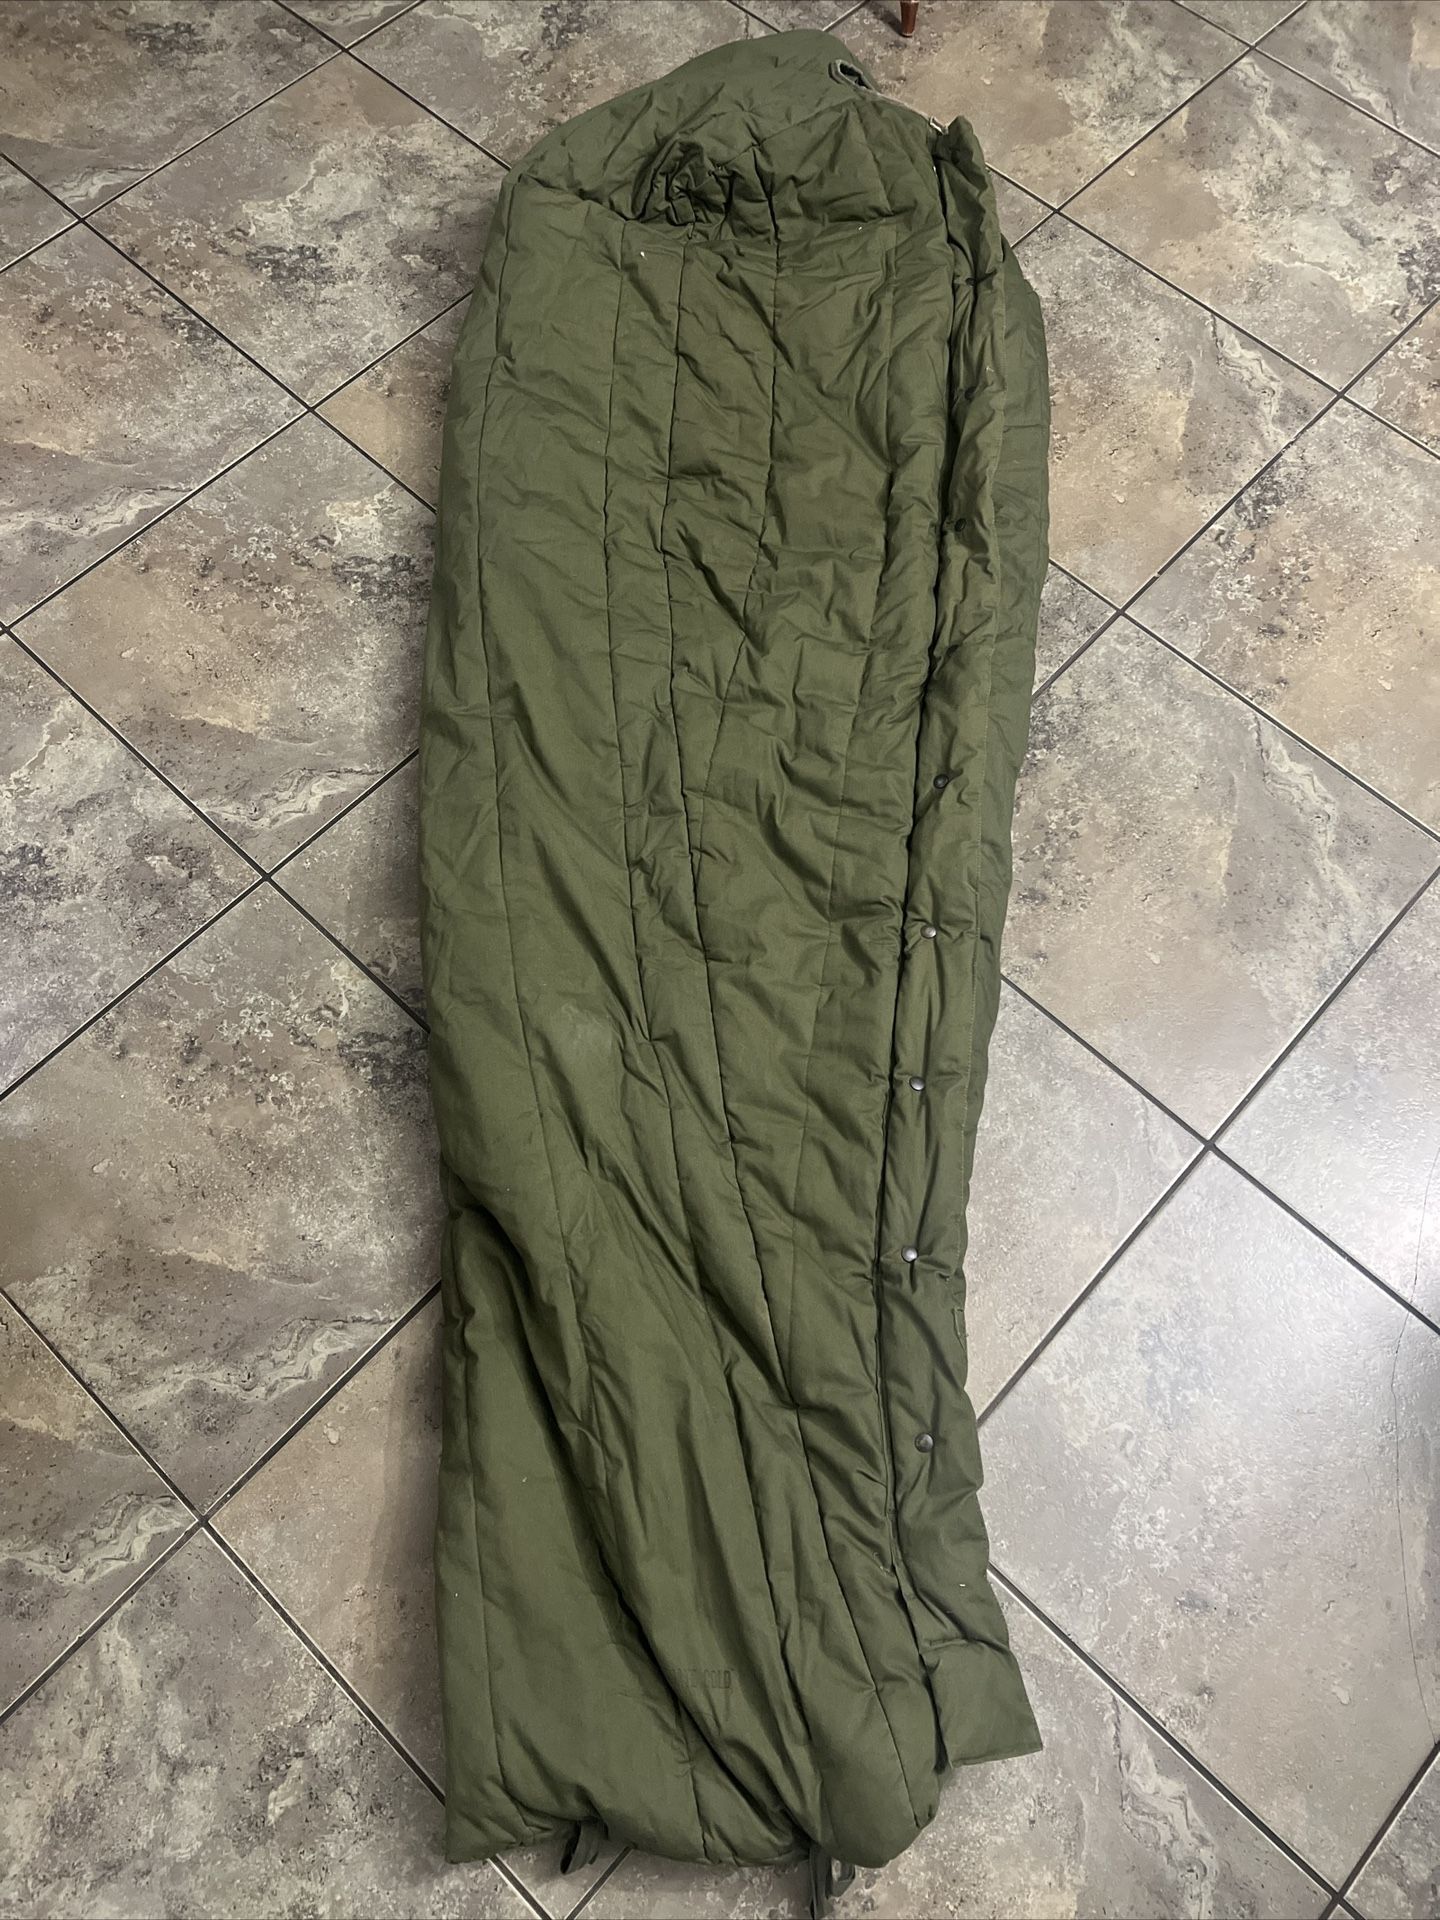  U.S Military Army Intermediate Cold Weather Vintage Sleeping. Nice clean and fully functional.